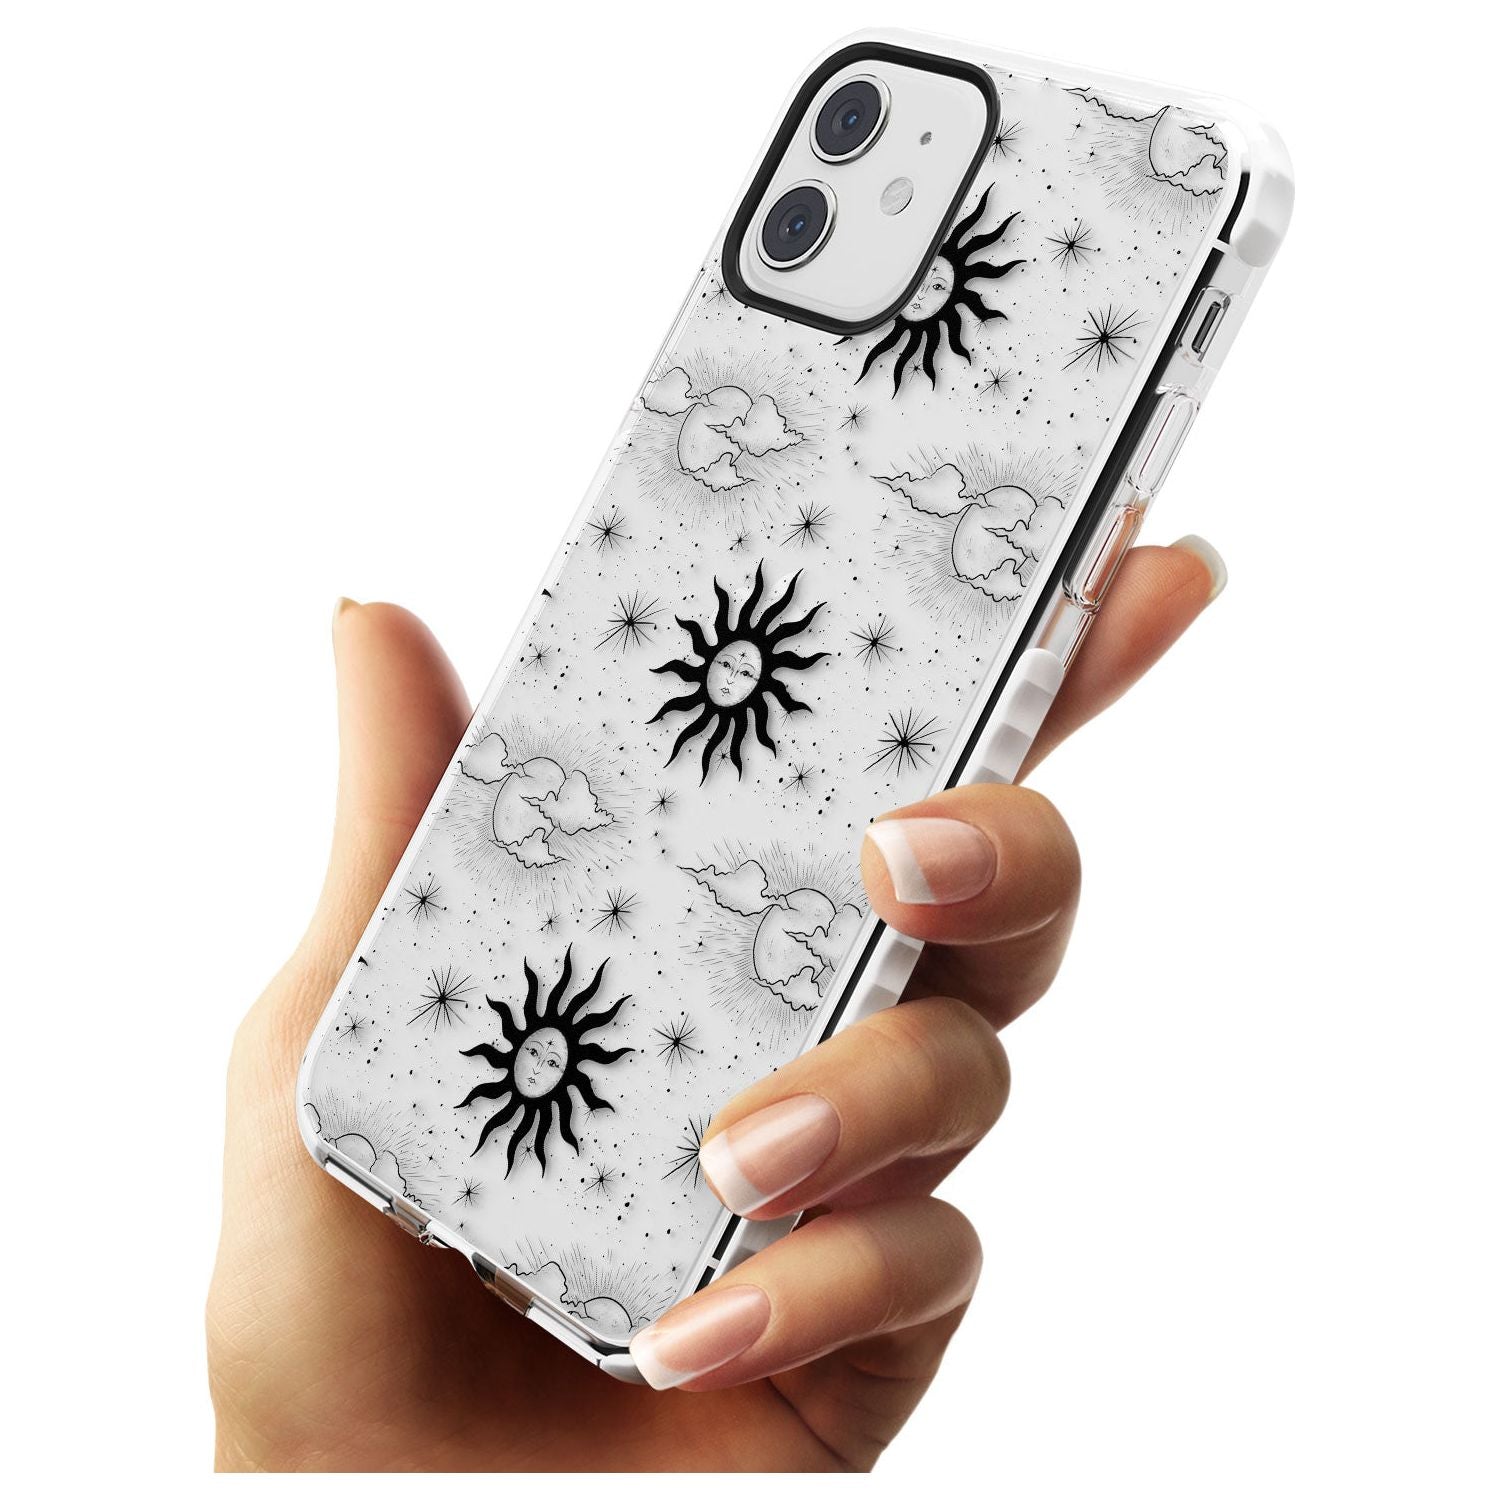 Suns & Clouds Vintage Astrological Impact Phone Case for iPhone 11